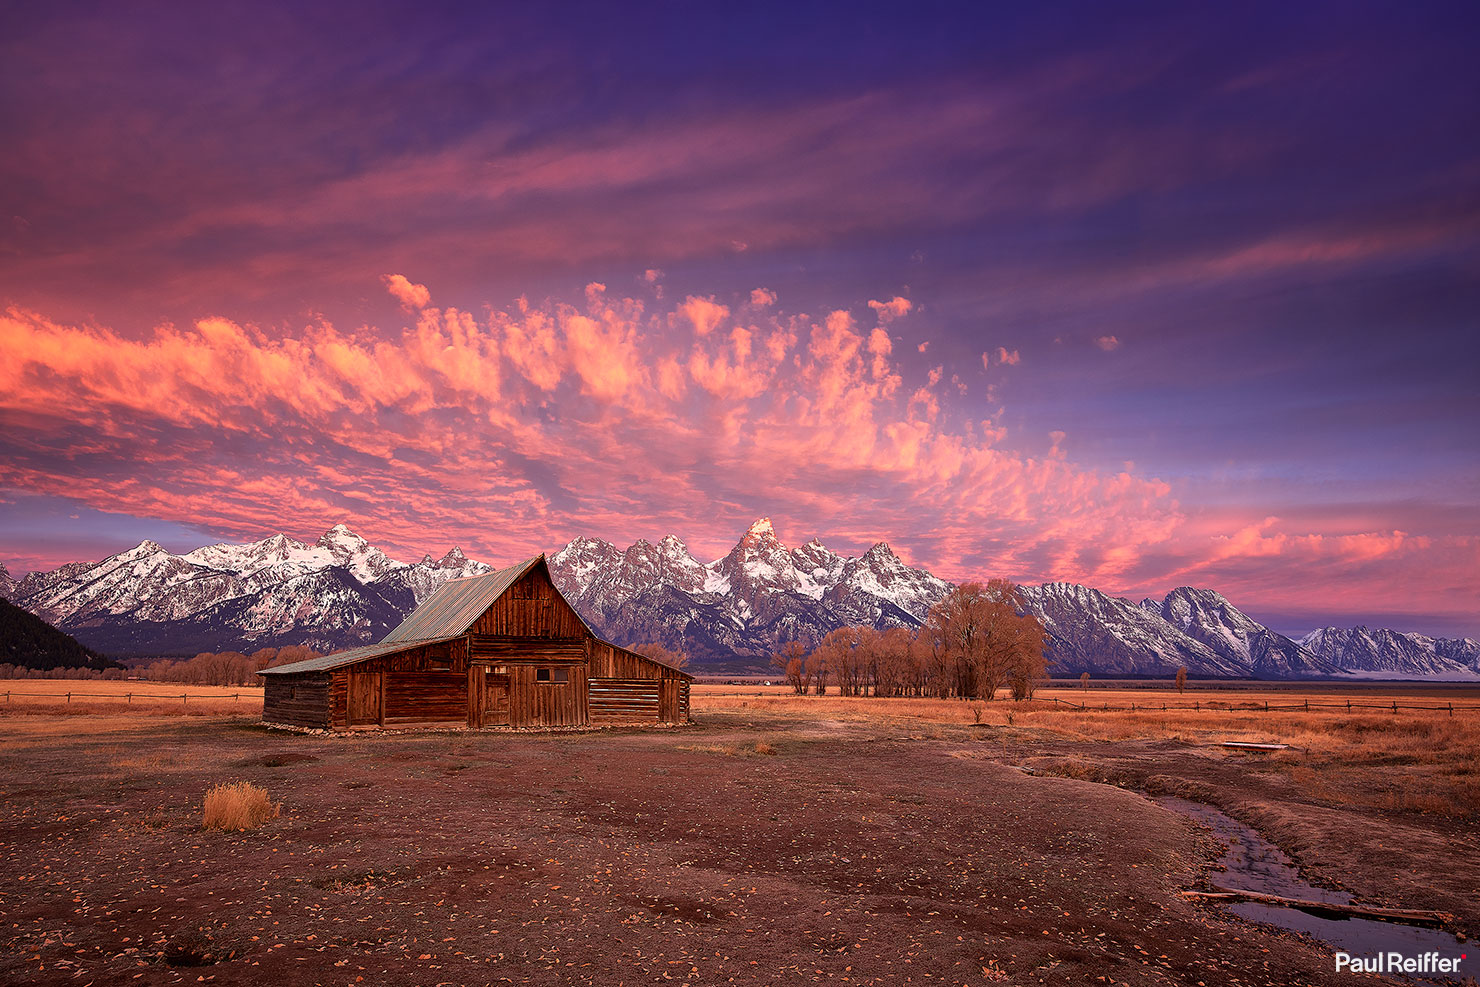 Fall Winter Clouds T A Moulton Barn Mormon Row Antelope Wyoming Jackson Hole Wooden Historic Sunrise Fire Clouds Paul Reiffer Professional Photographer Phase One